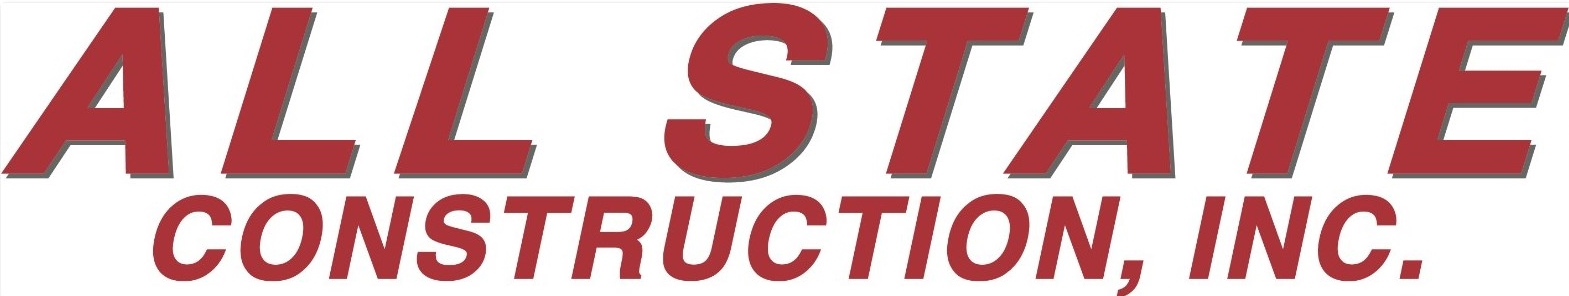 All State Construction, Inc. logo